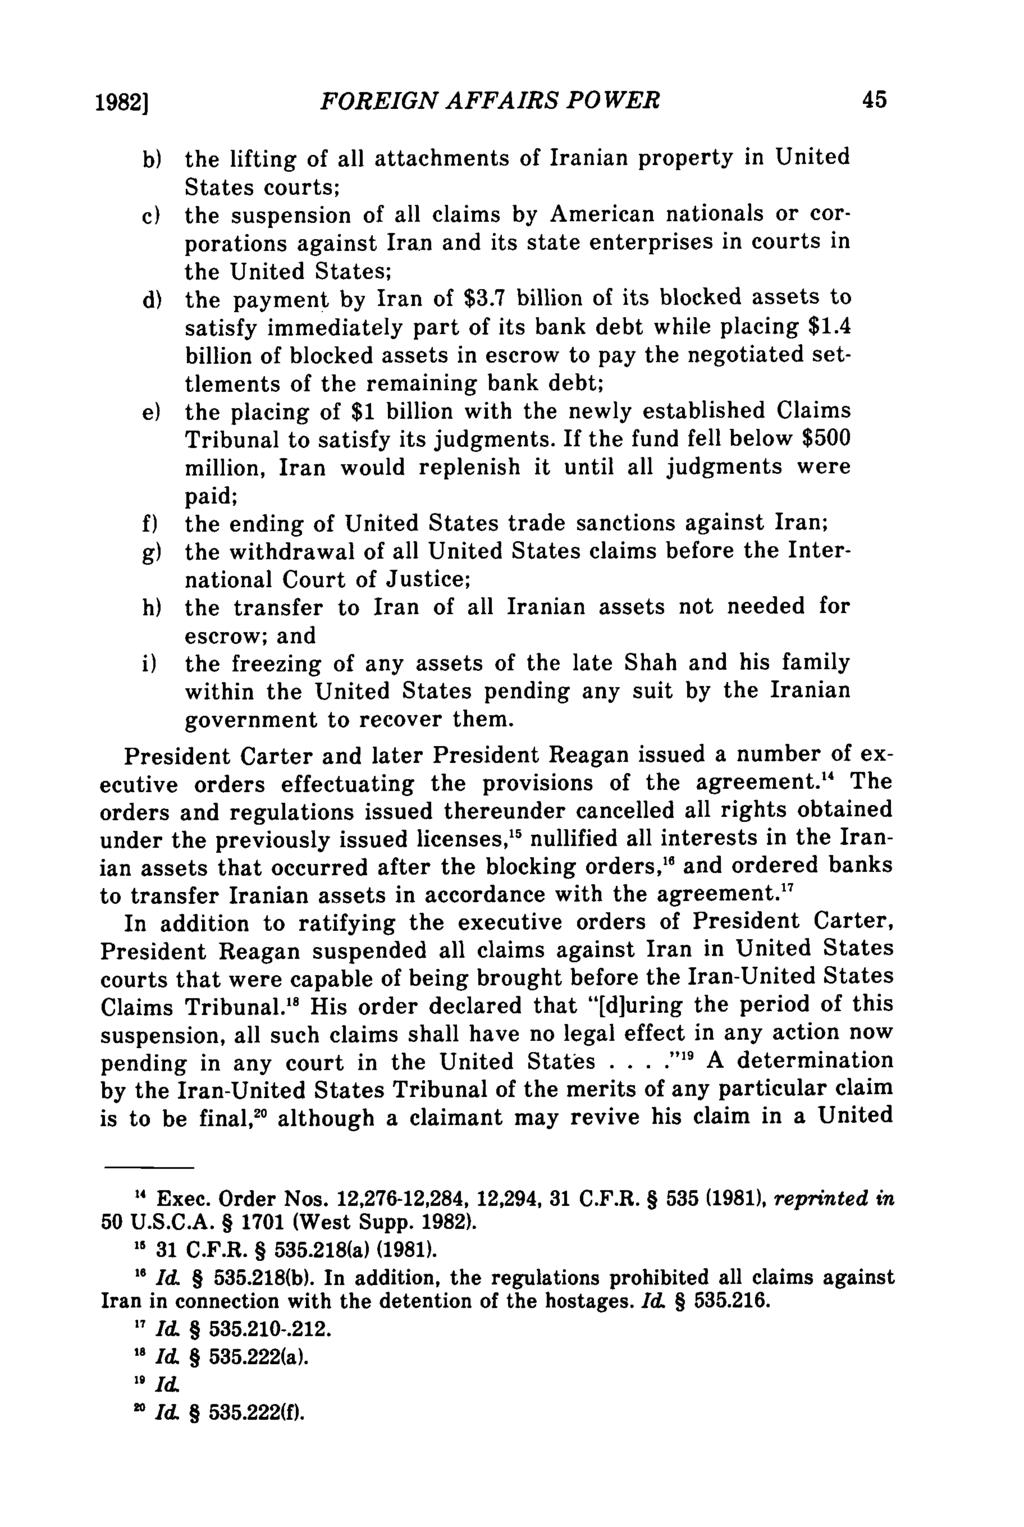 1982] FOREIGN AFFAIRS POWER b) the lifting of all attachments of Iranian property in United States courts; c) the suspension of all claims by American nationals or corporations against Iran and its